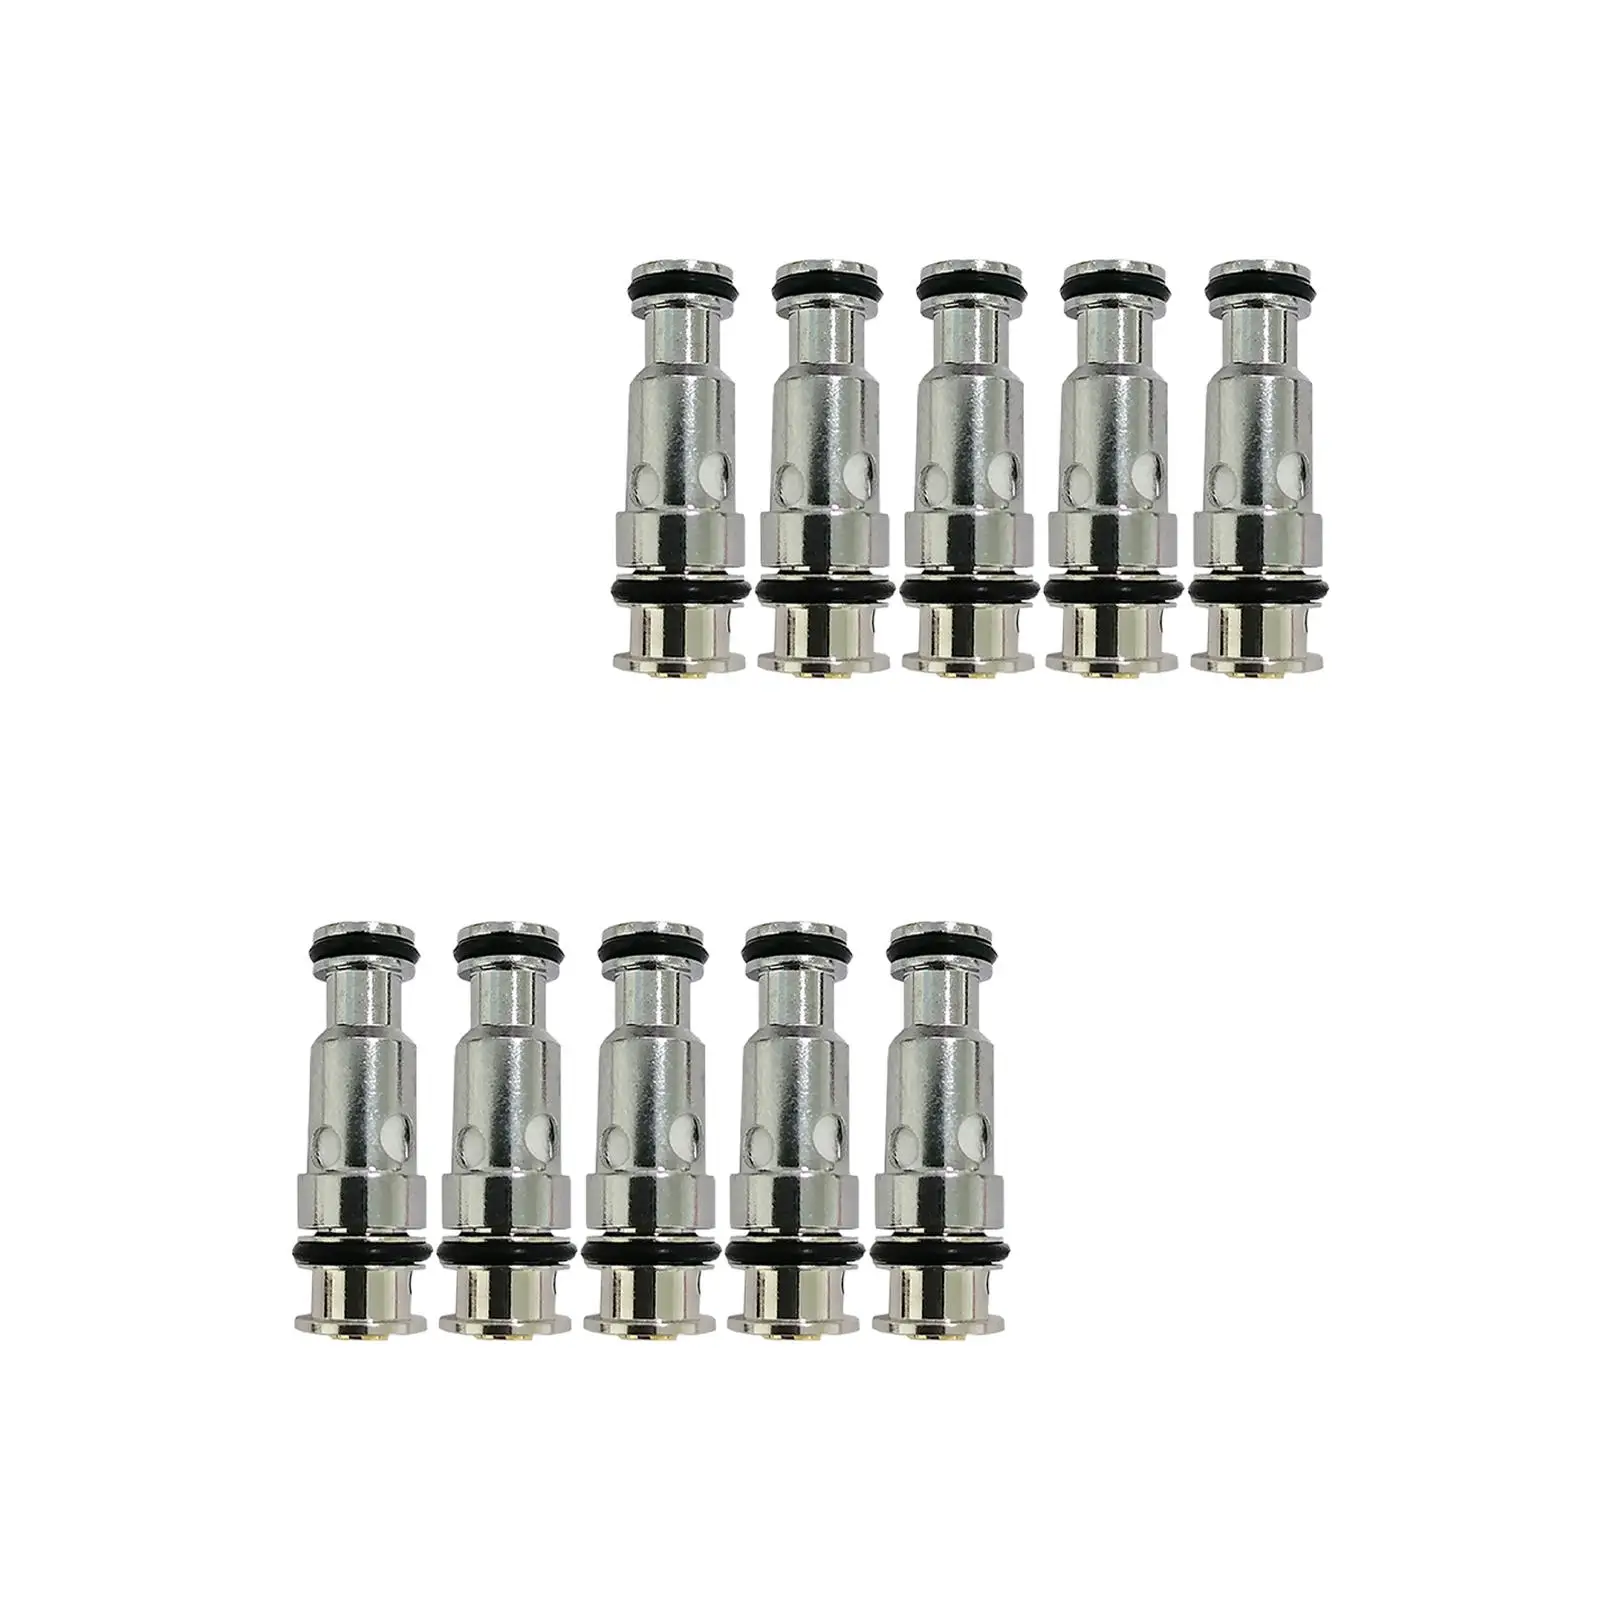 Set of 5 PNP Coils Easy Use Stainless Steel Plug in Play Durable for Argus Air 857 Accessories Parts